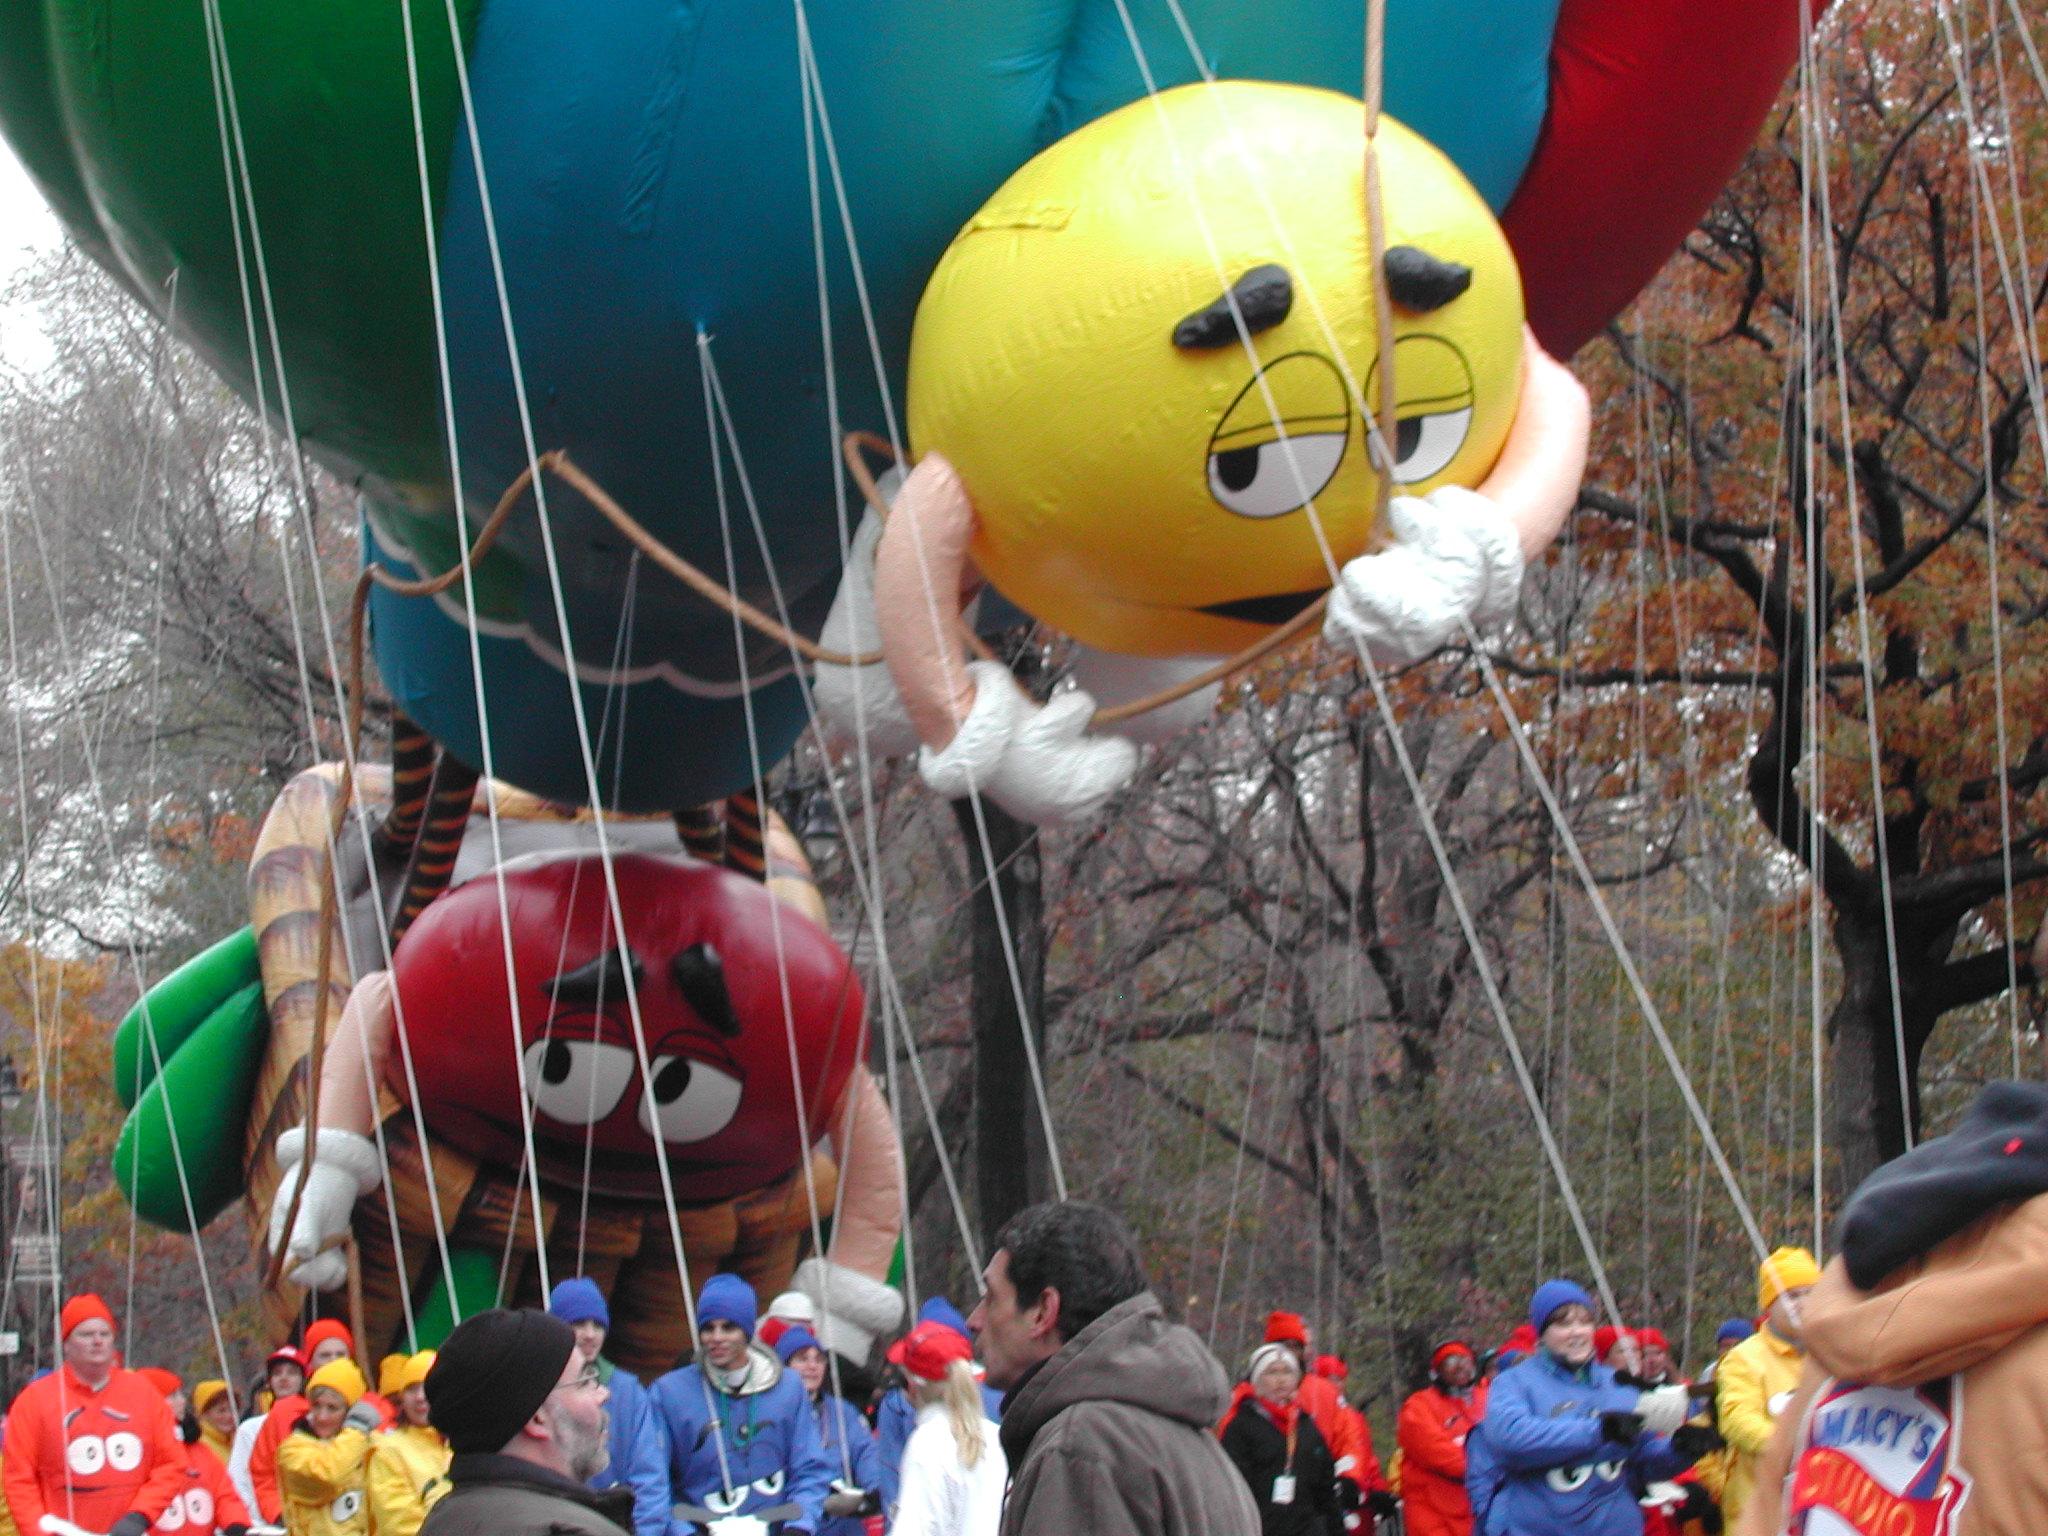 The Worried expressions on these M&M's faces should have been a warning sign that this float would be headed for trouble